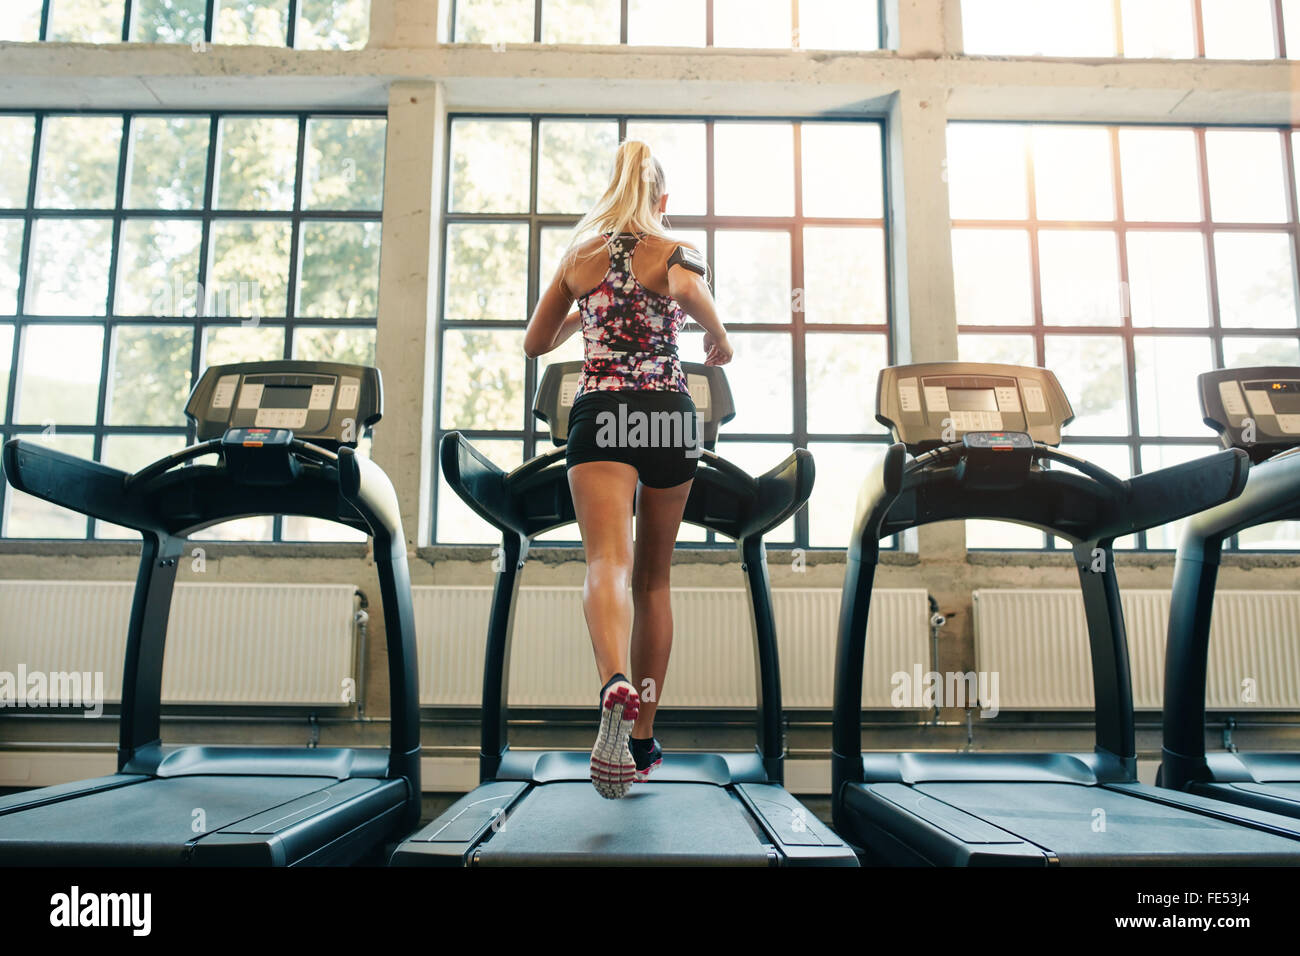 Horizontal shot of woman jogging on treadmill at health club. Female working out at a gym running on a treadmill. Stock Photo